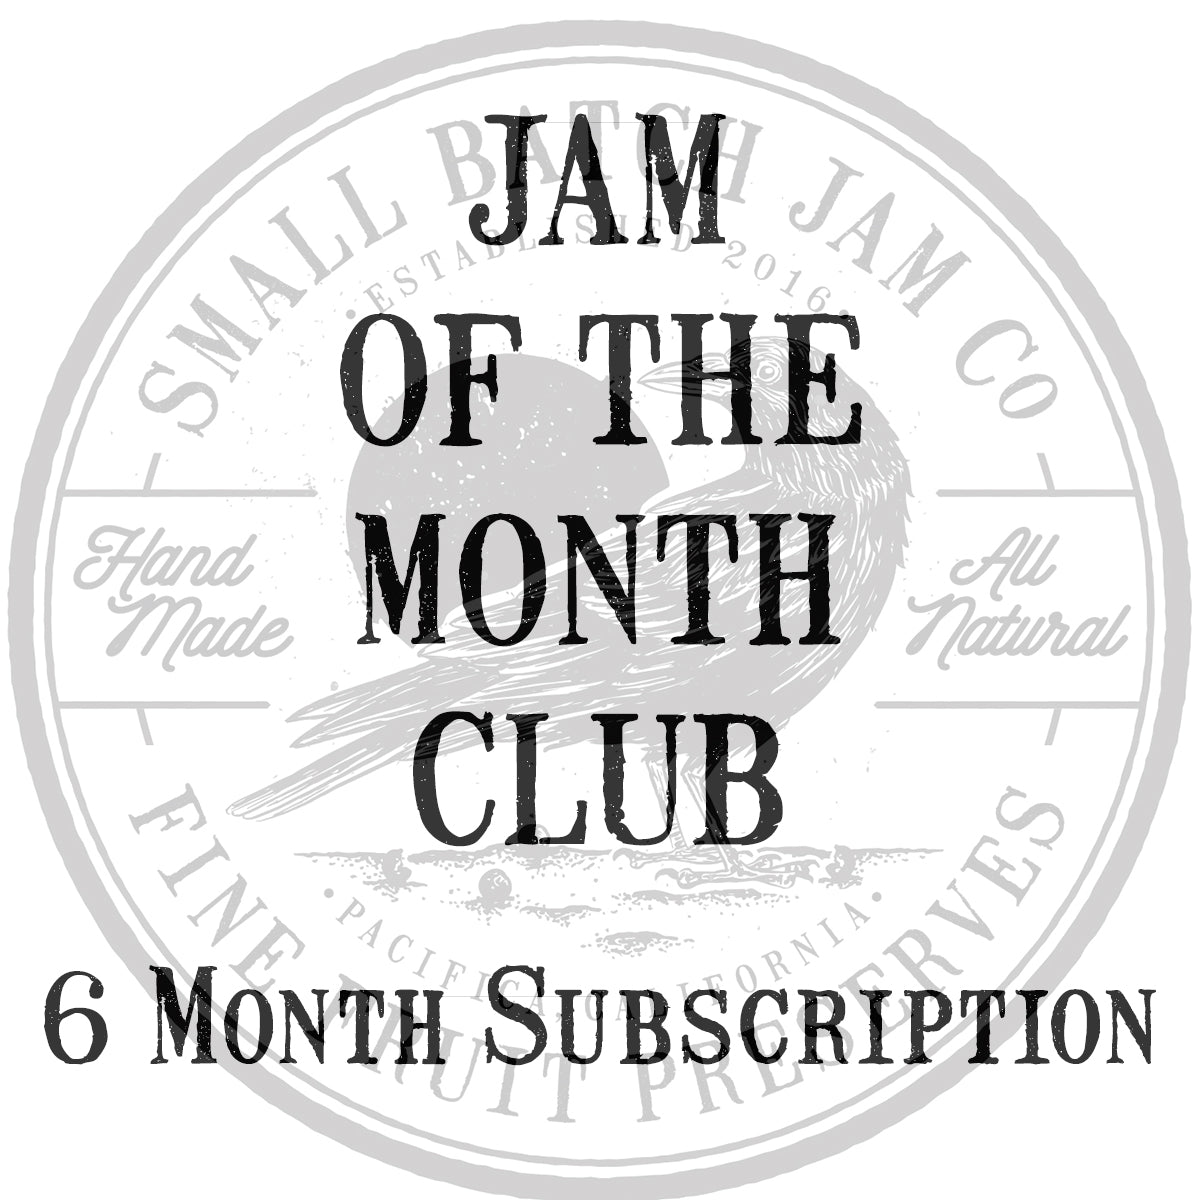 Jam Of The Month Club - 6 Month Subscription - Small Batch Jam Co